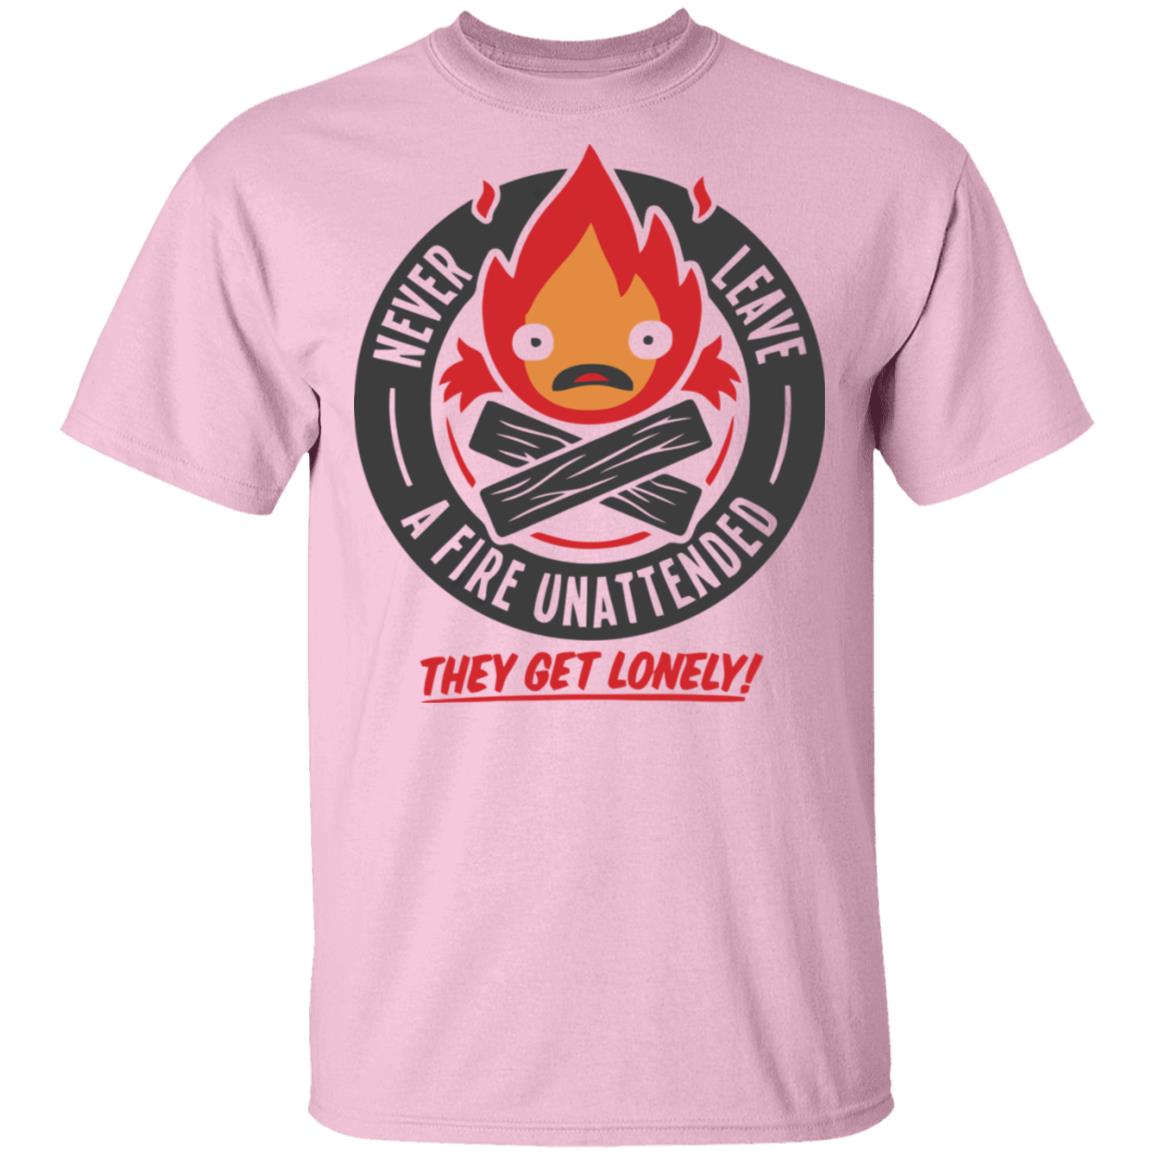 Howl’s Moving Castle – Never Leave a Fire T Shirt